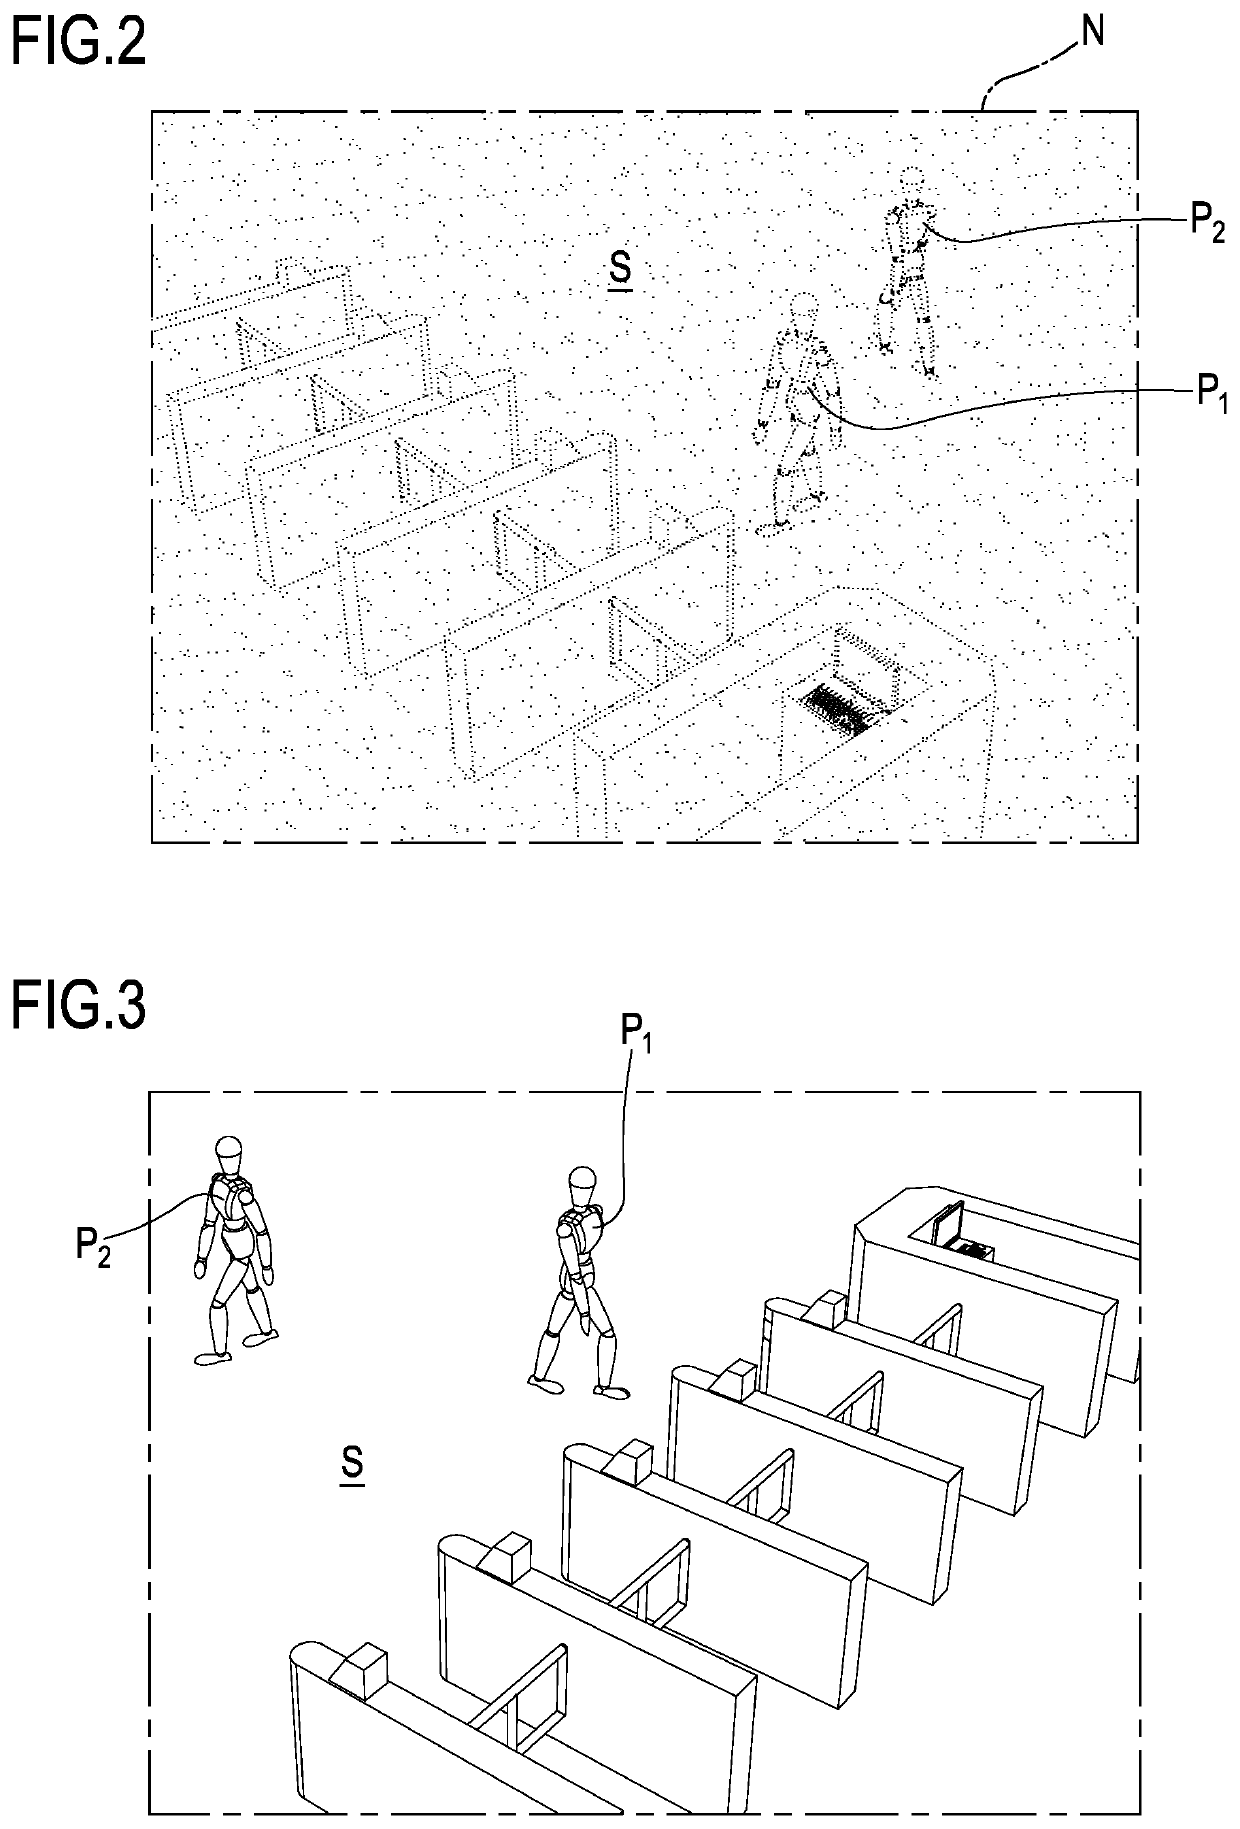 Method and system for object detection and classification